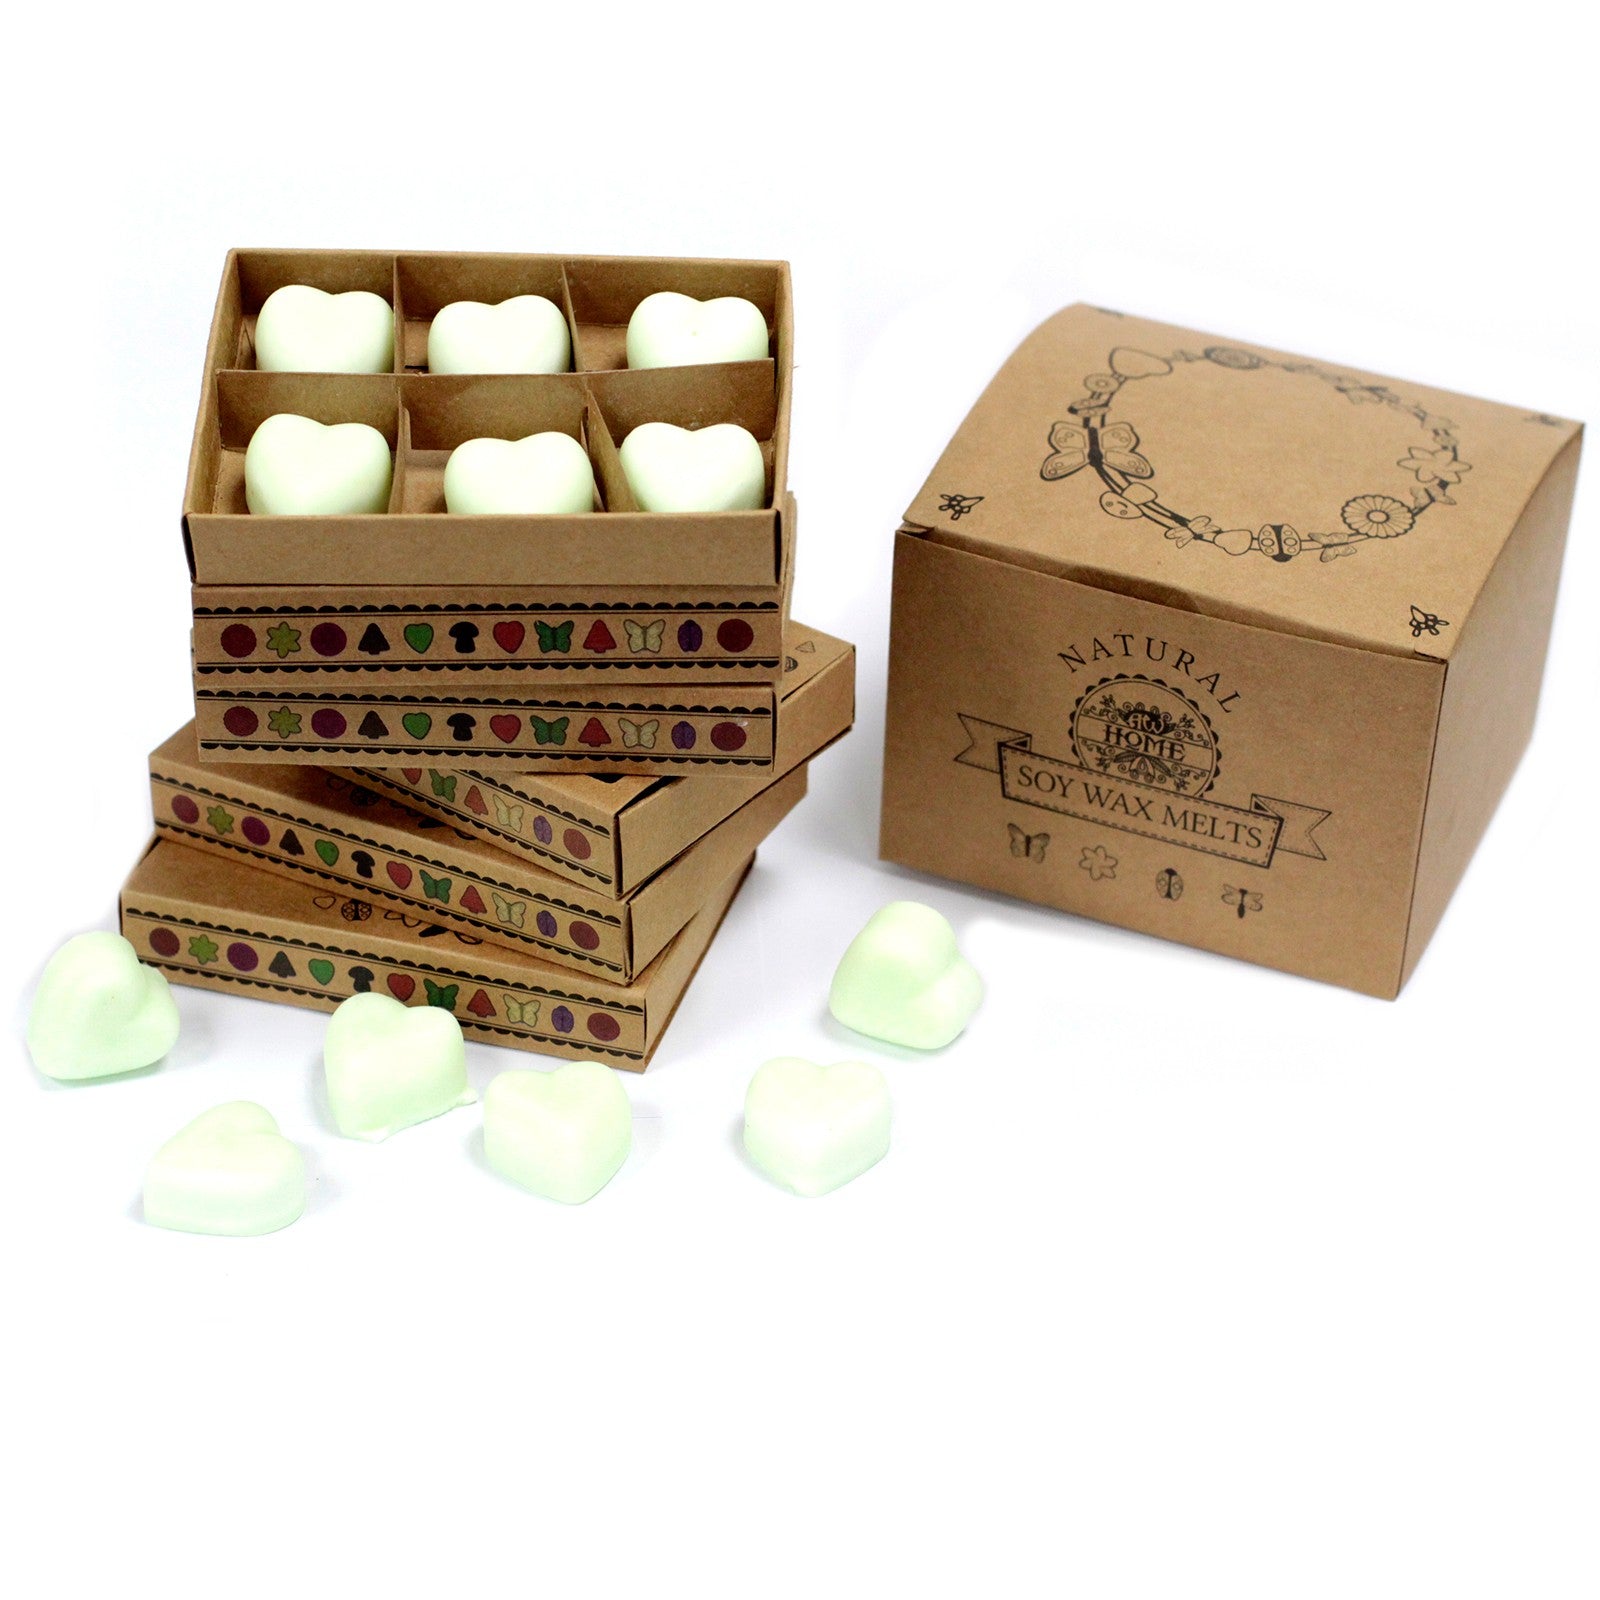 View Box of 6 Wax Melts Apple Spice information